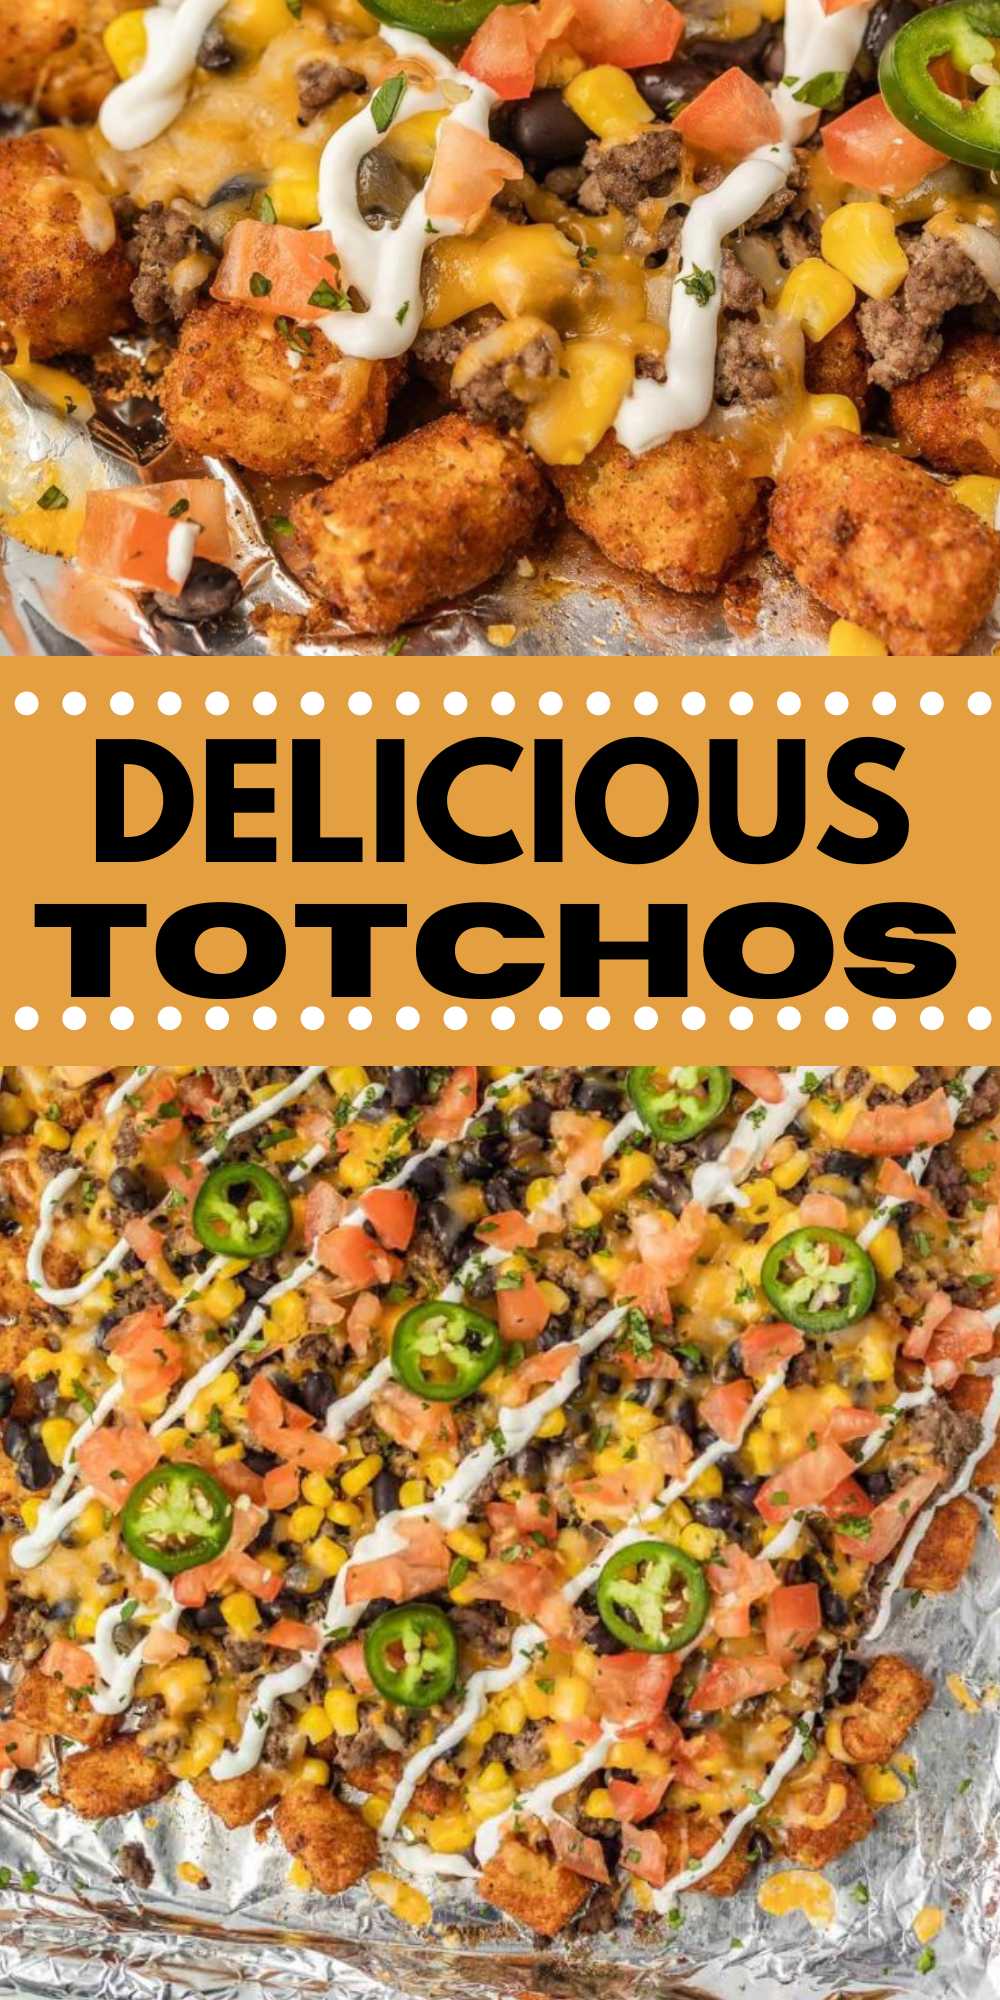 This Totchos recipe is a family favorite. Crispy tater tots are topped with beef, cheese, and more. Make this appetizer for next gathering. The tots cook crispy giving this party food the best flavor and texture. The next time you need a delicious appetizer, make totchos. #eatingonadime #totchos #tatortotnachos